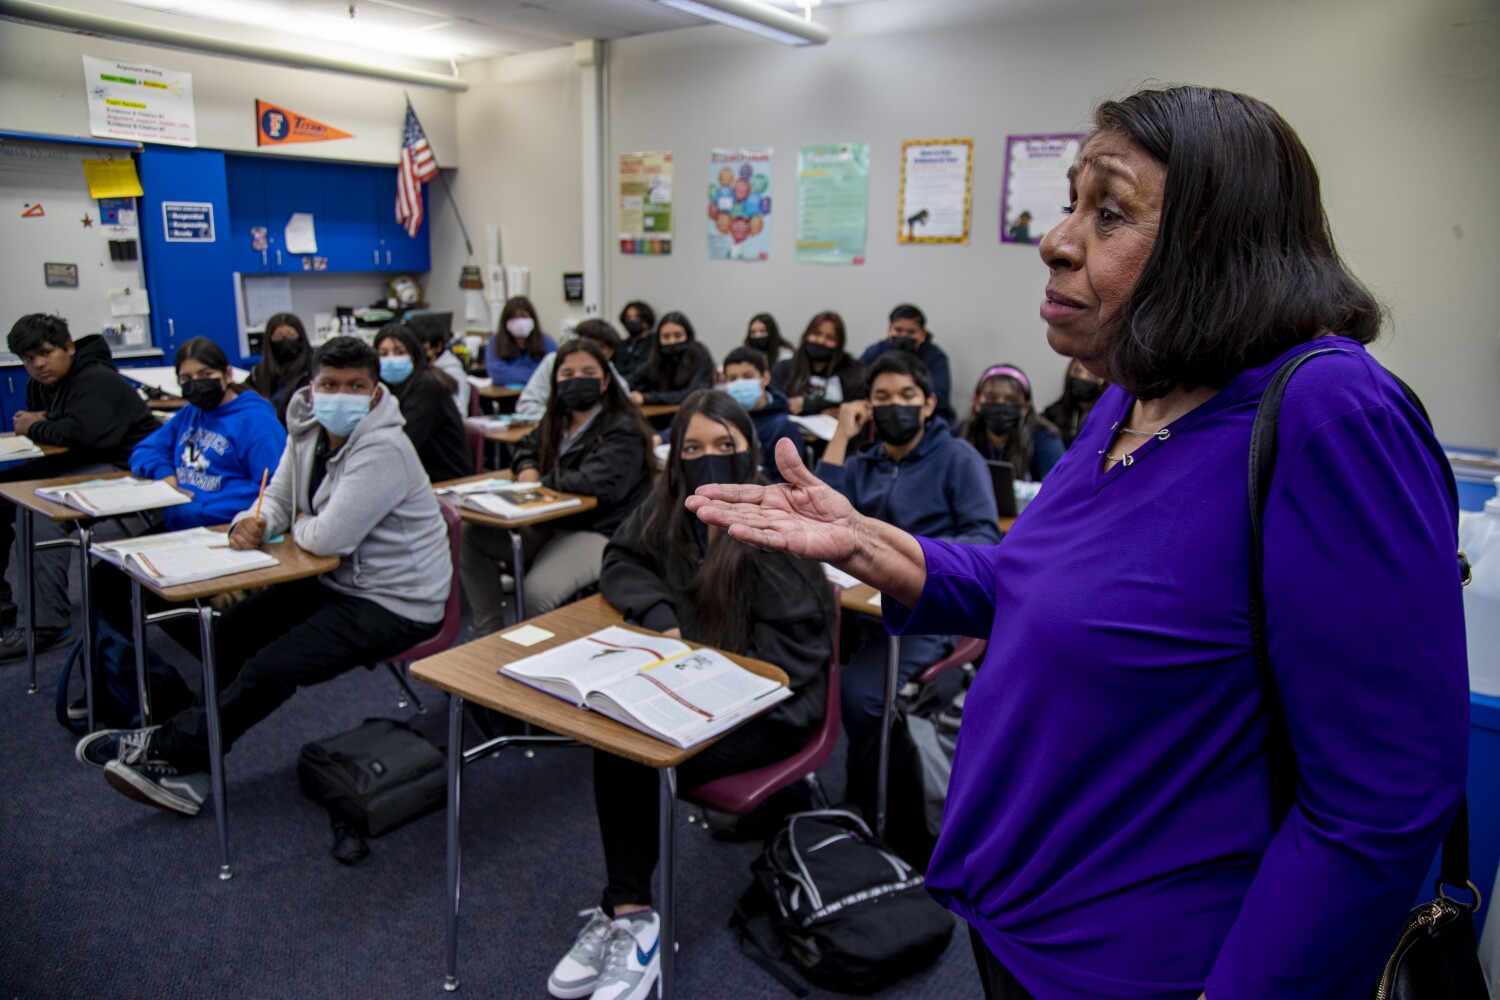 Sent to the 'Mexican school' 75 years ago, Sylvia Mendez's fight for equality continues